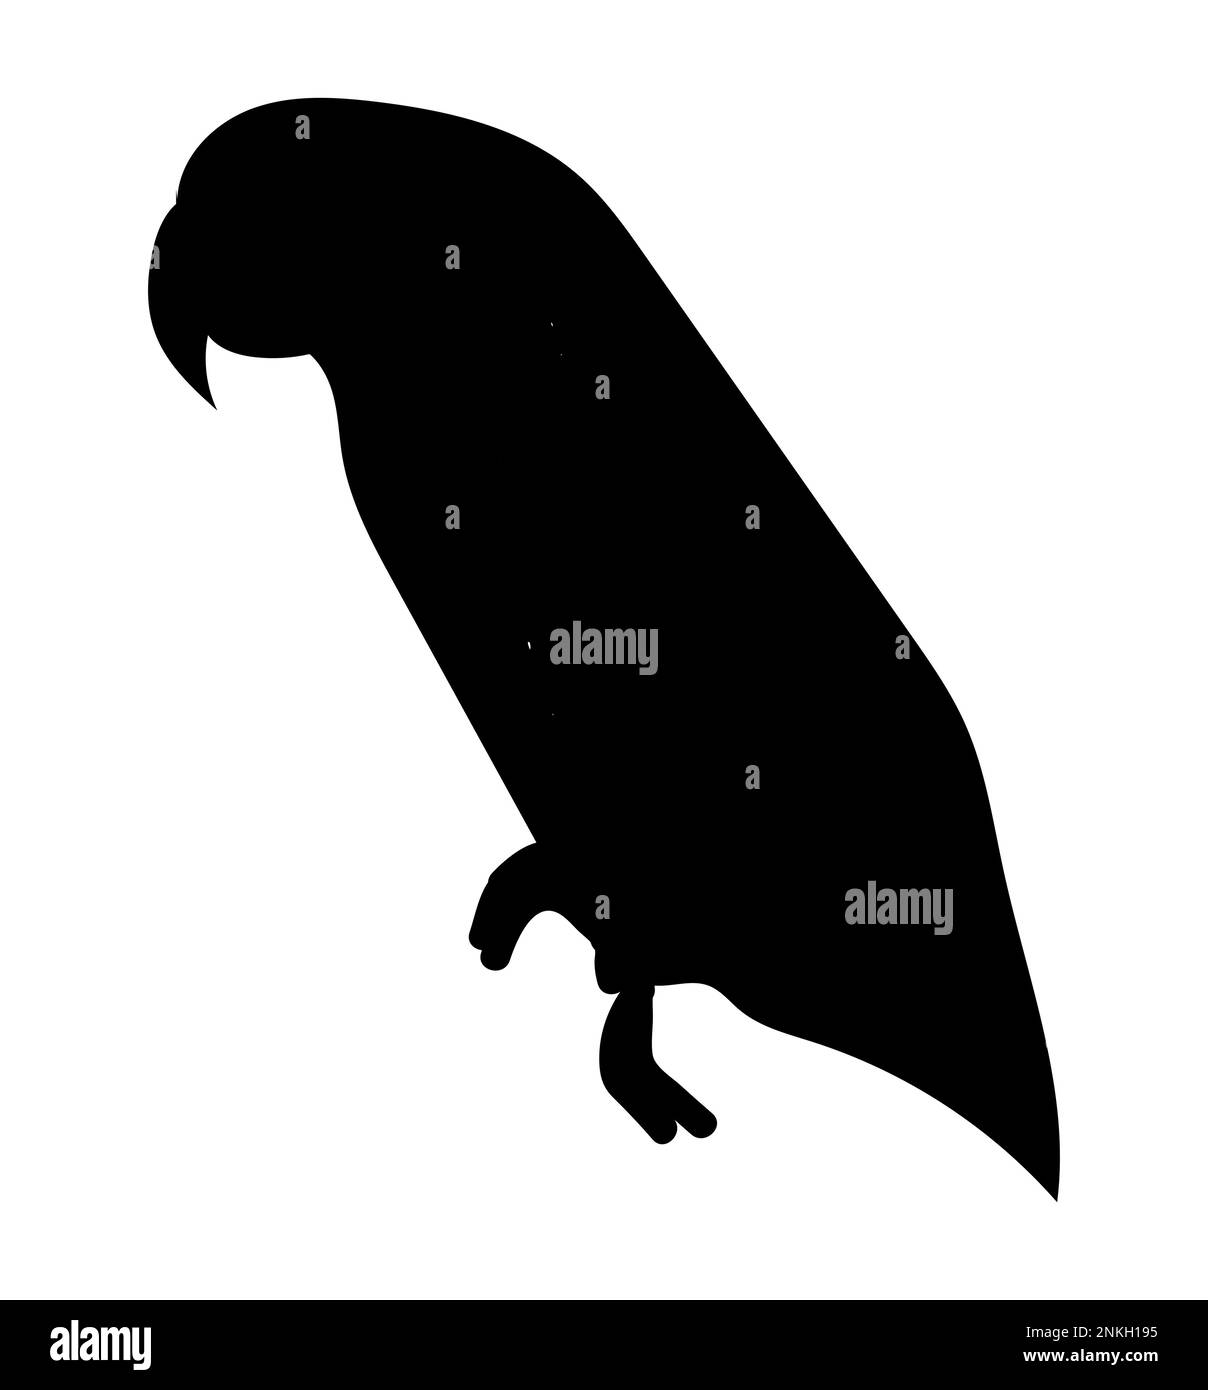 Silhouette of a parrot budgie. Vector illustration of a budgerigar parrot. Side view, logo, icon Stock Vector